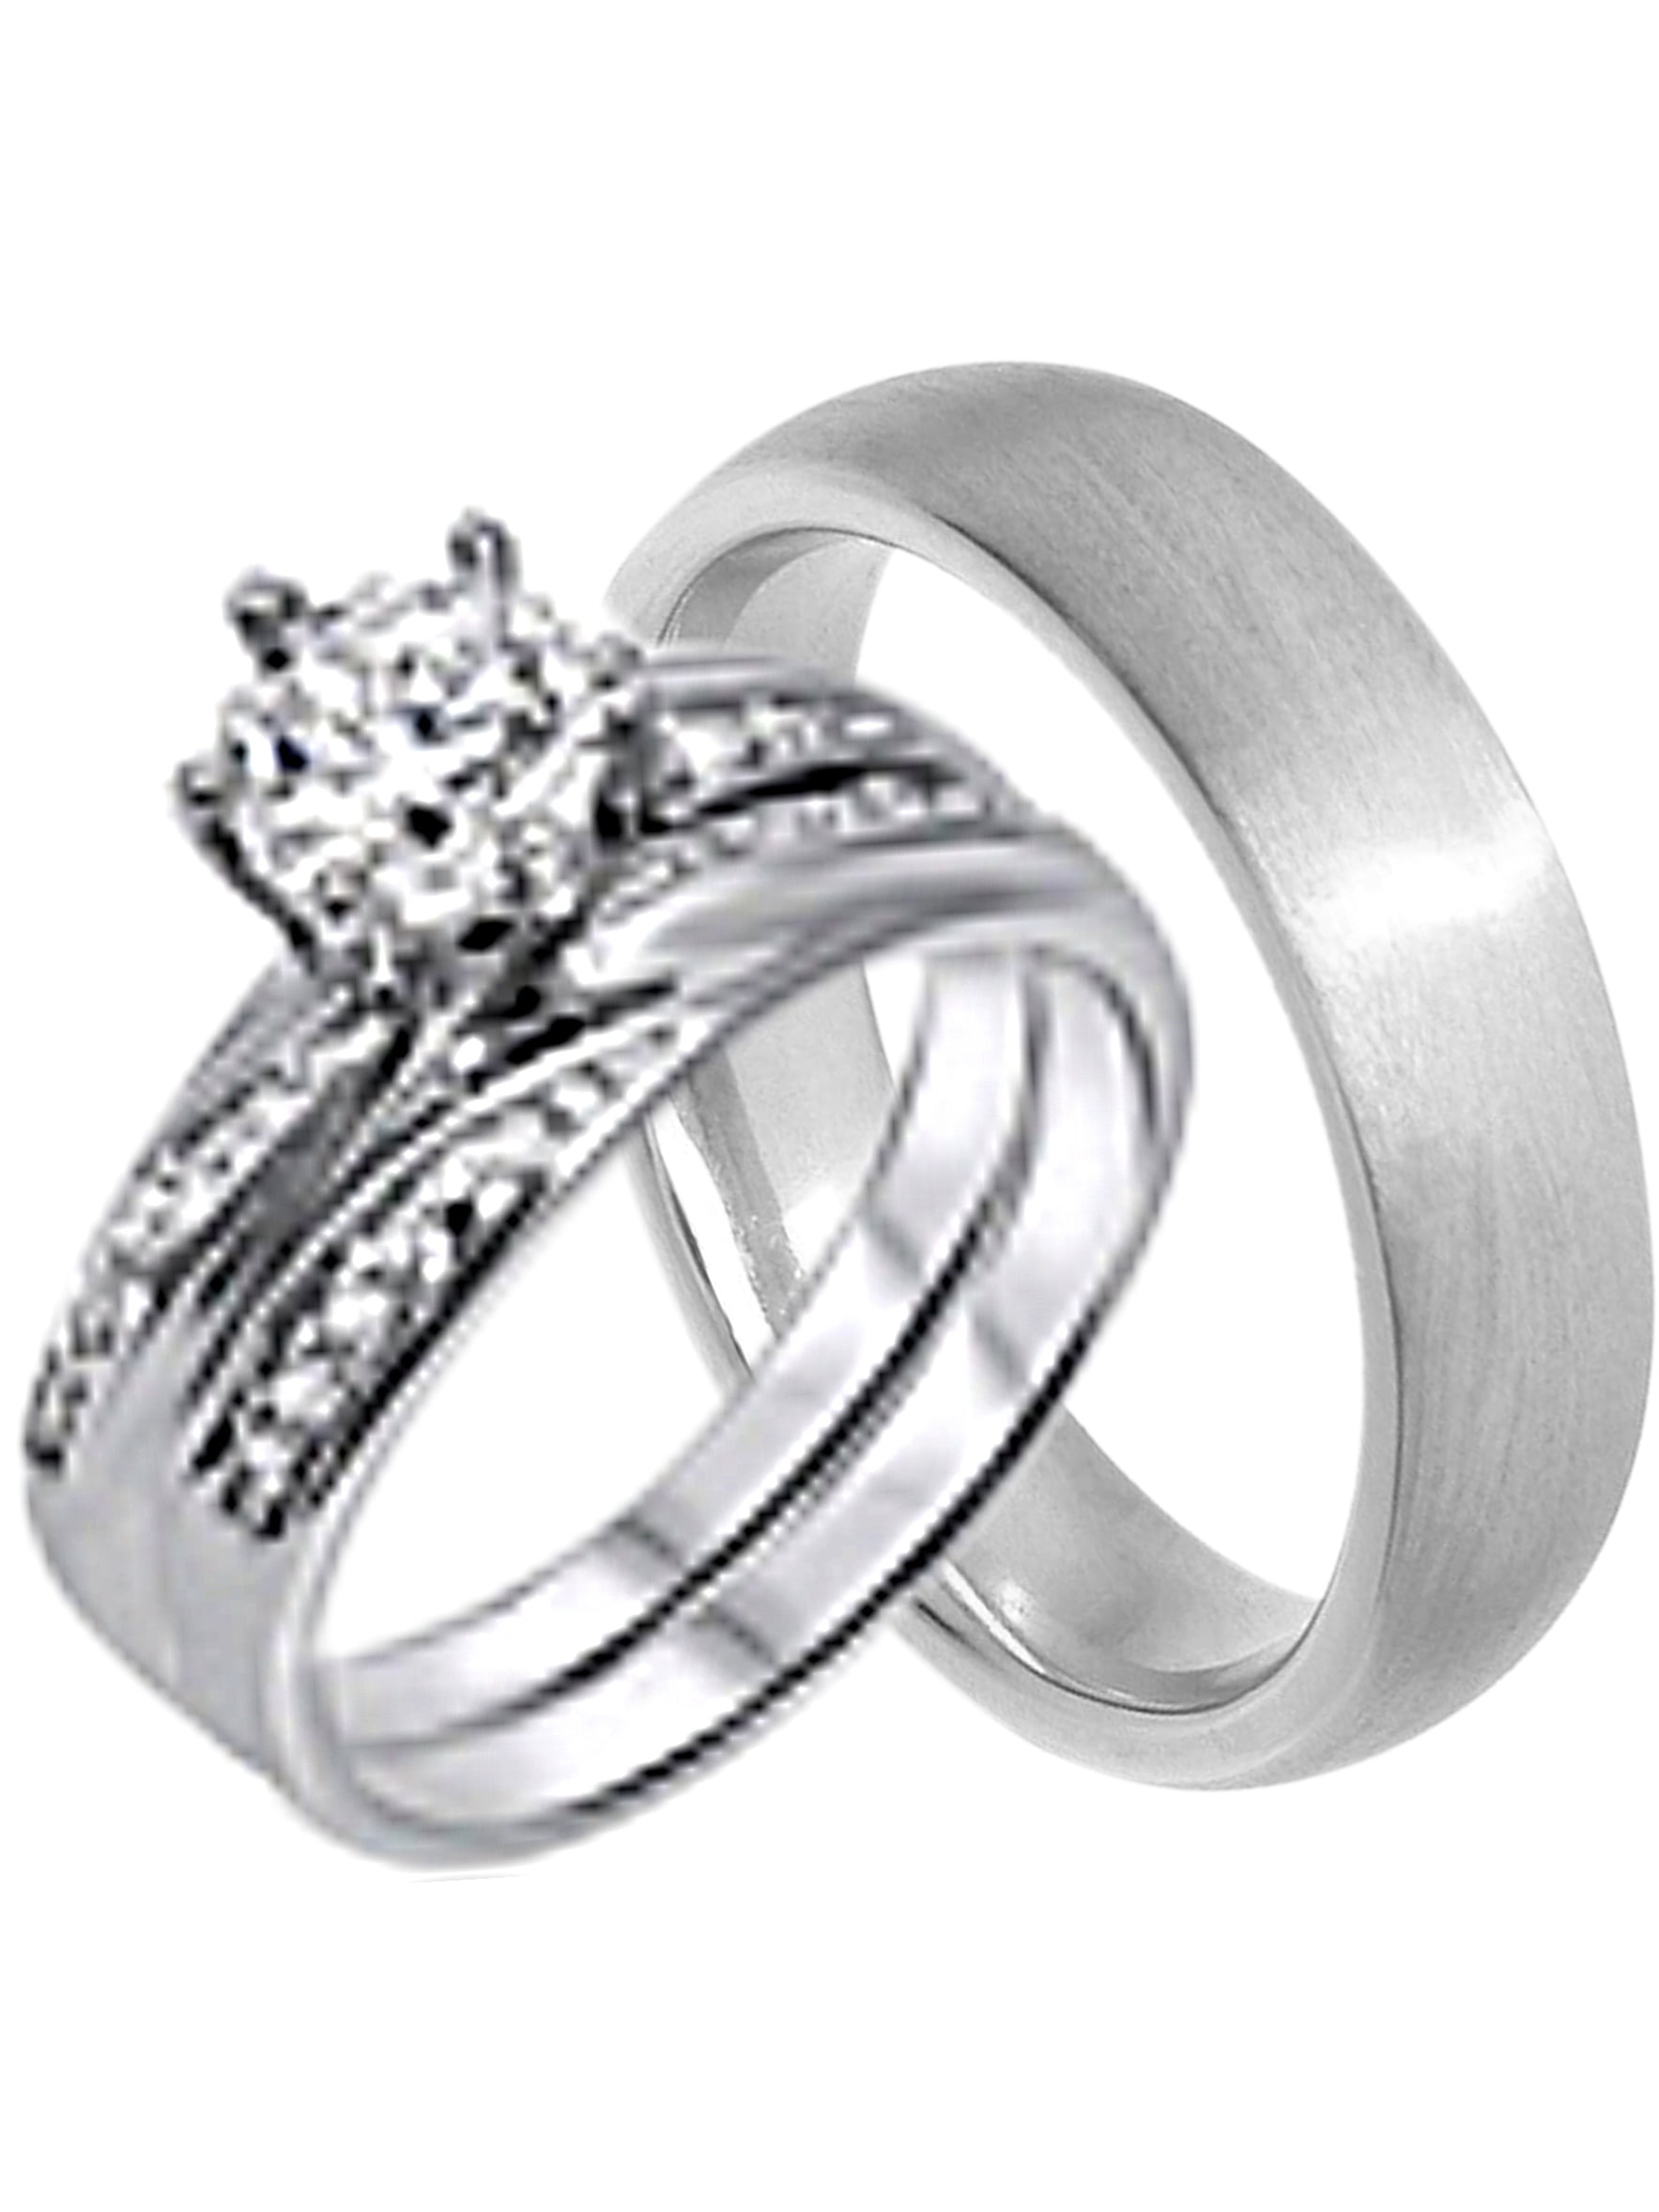 His and Hers Wedding Ring Set Cheap Wedding Bands for Him and Her - www.waldenwongart.com